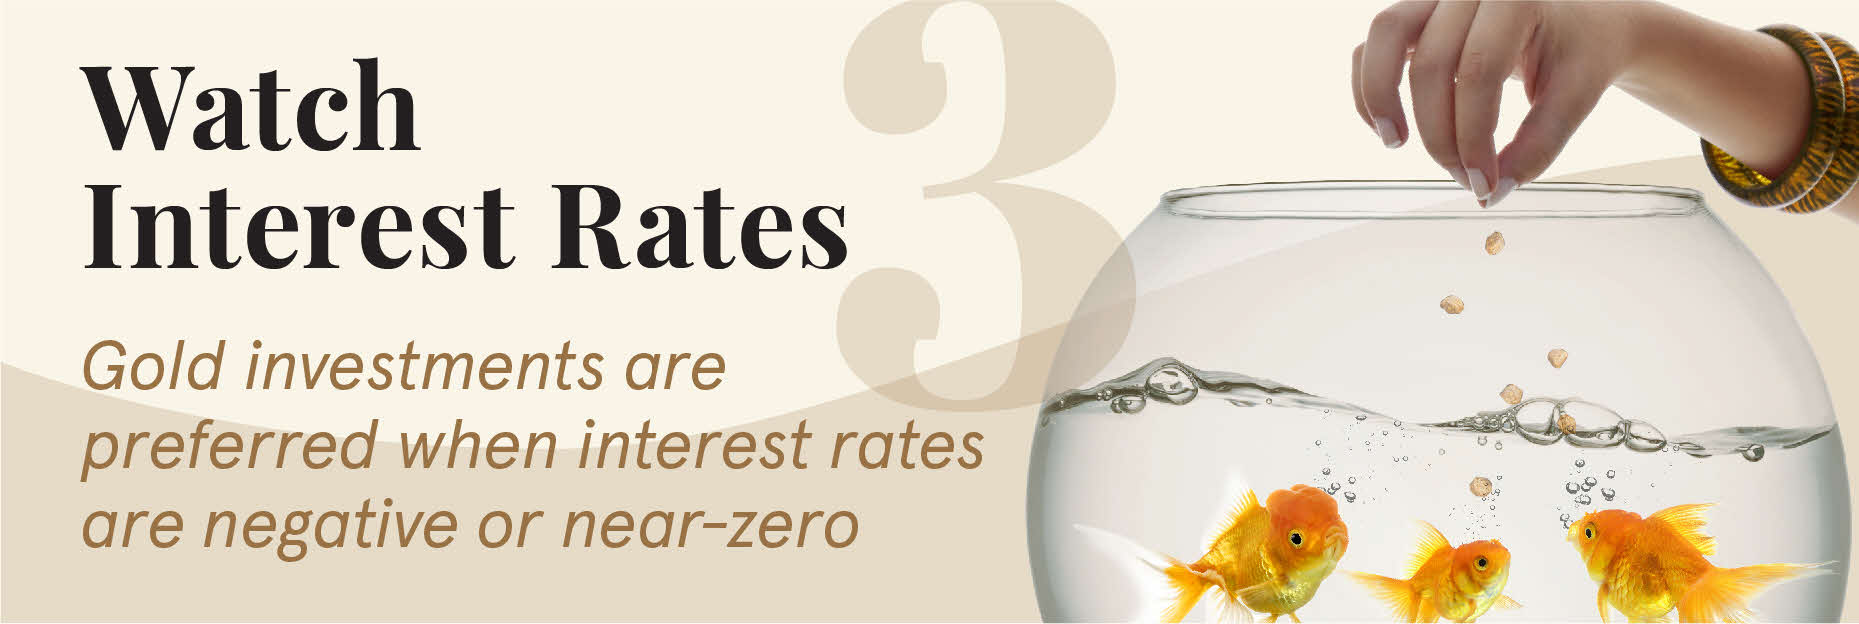 Watch interest rates. Gold investments are preferred when interest rates are negative or near-zero